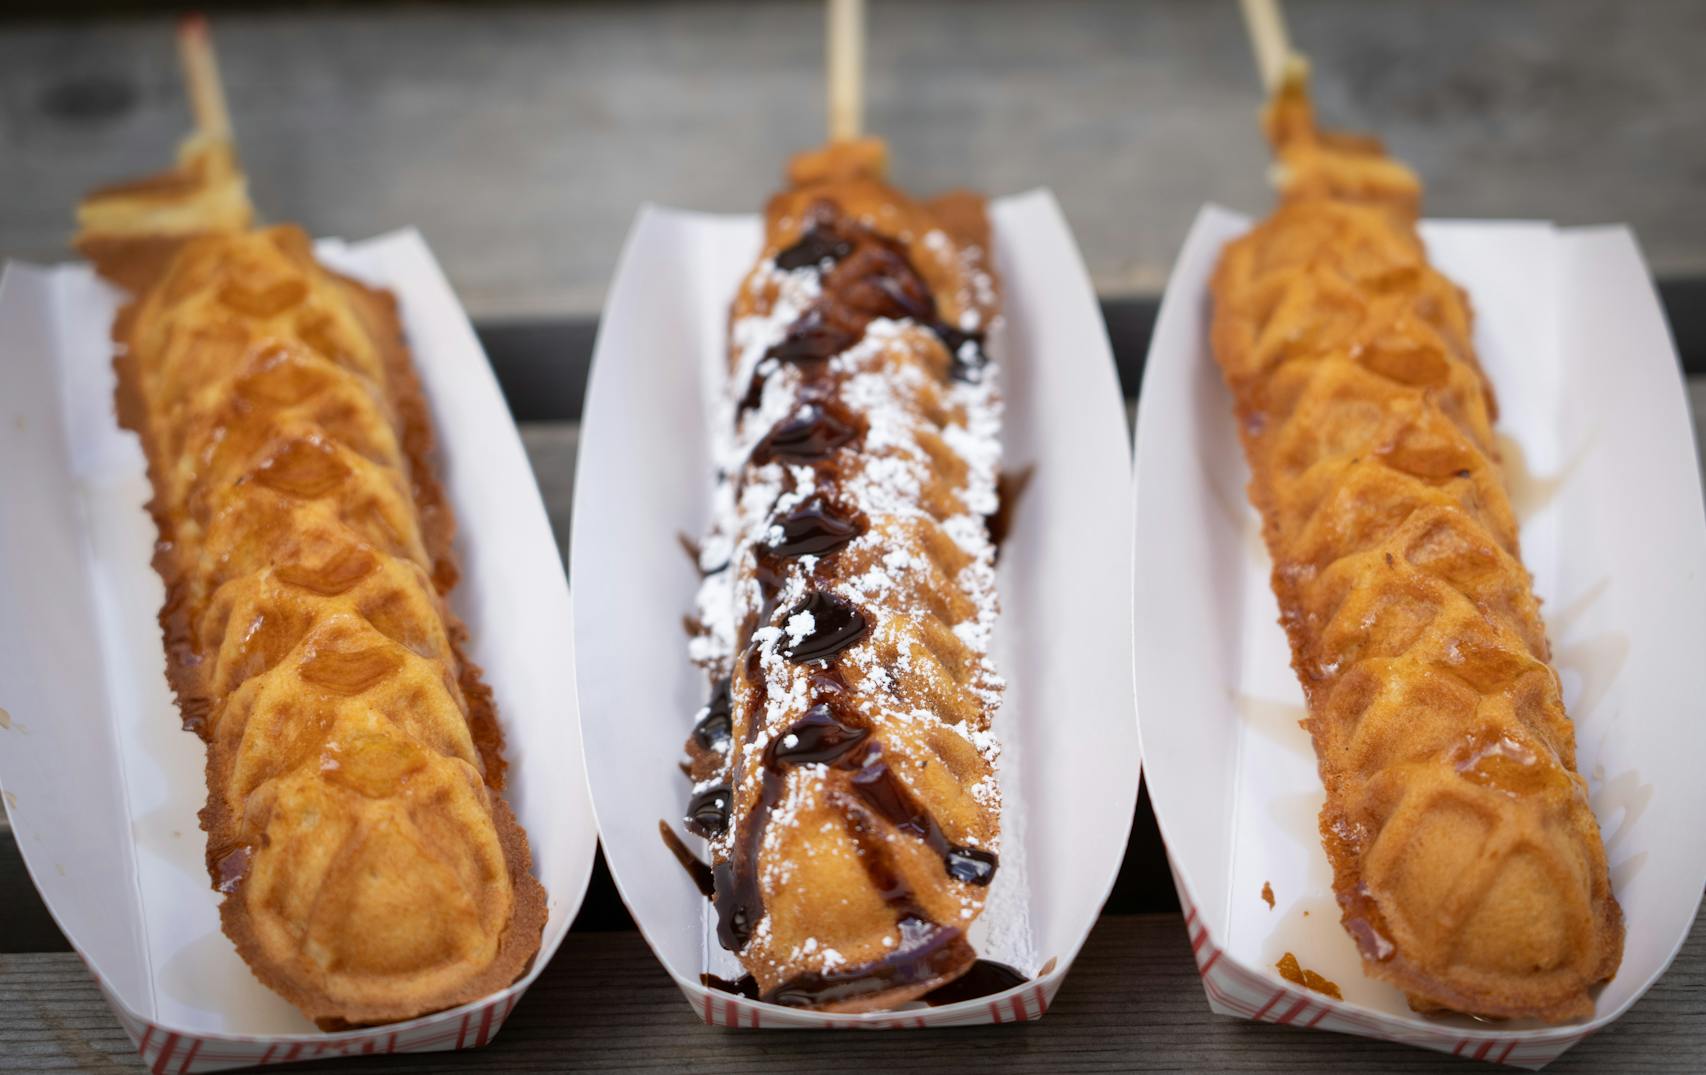 Breakfast Sausage in a Waffle On-A-Stick, Brownie Waffle Stick and Chicken in a Waffle On-A-Stick from Waffle Chix. New foods at the Minnesota State Fair photographed on Thursday, Aug. 25, 2022 in Falcon Heights, Minn. ] RENEE JONES SCHNEIDER • renee.jones@startribune.com